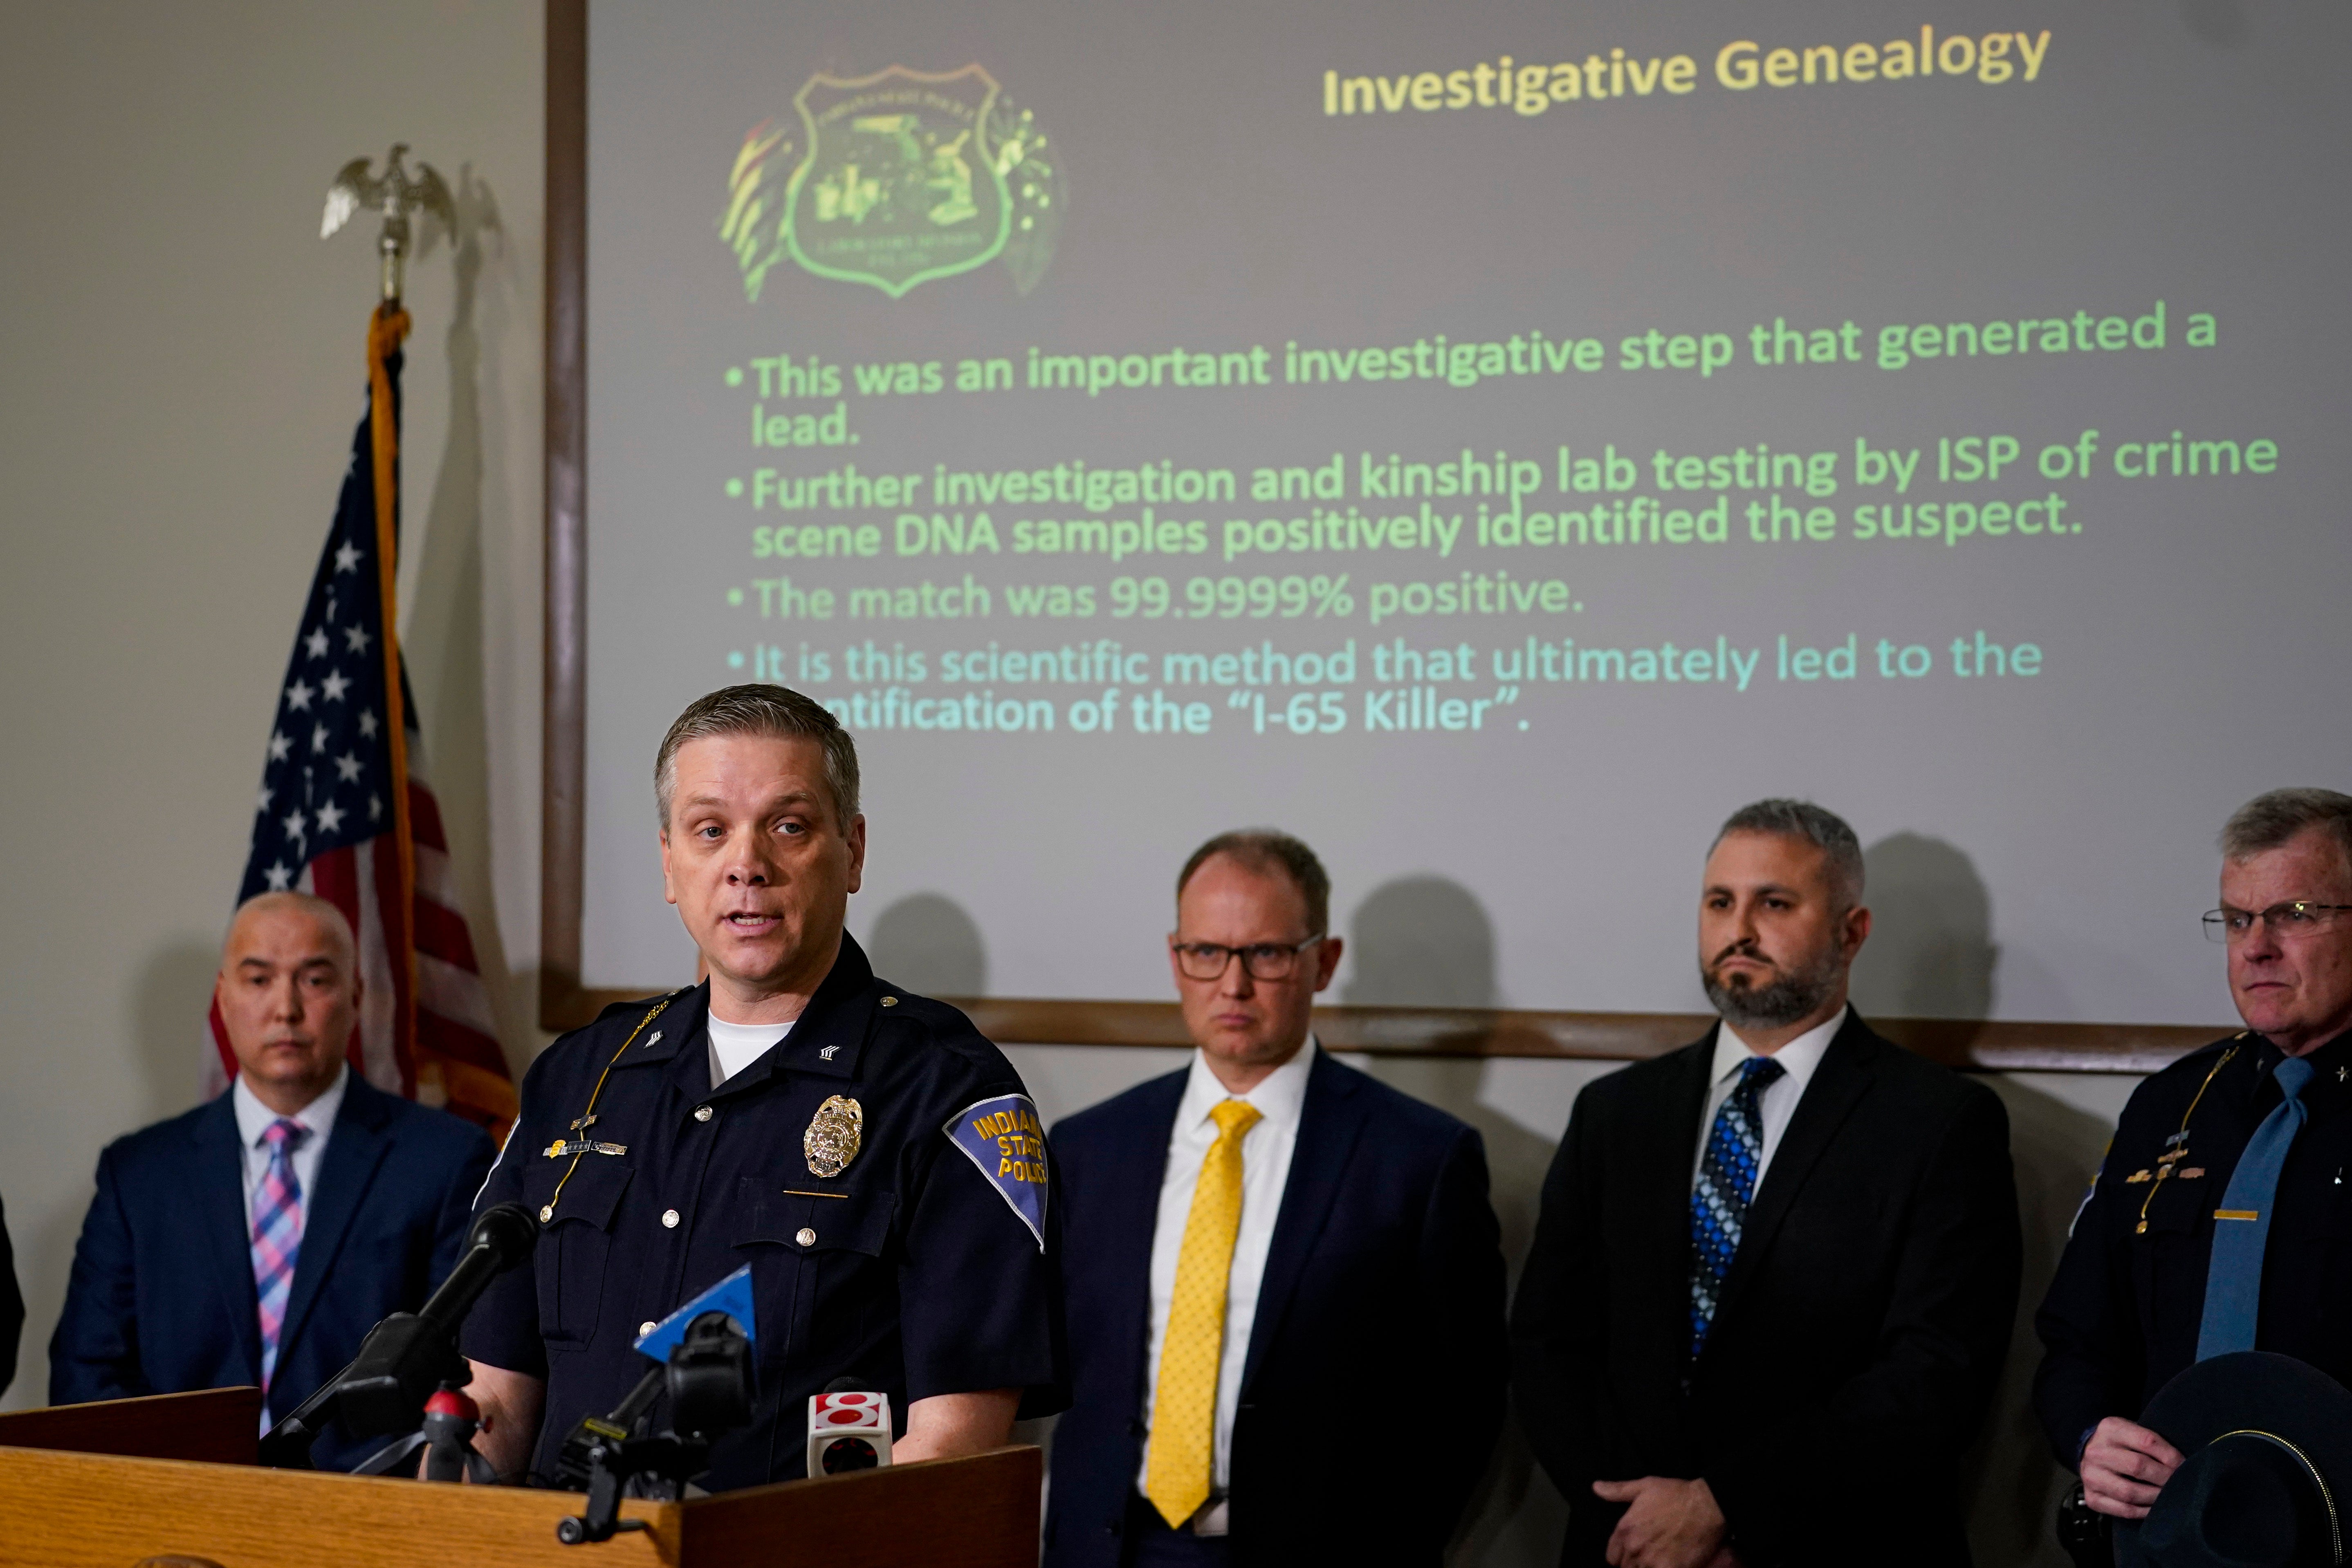 Indiana State Police Sgt. Glen Fifield announces the identity of the suspect in the "Days Inn" cold case murders during a press conference in Indianapolis, Tuesday, April 5, 2022. Police identified the suspect as Harry Edward Greenwell more than 30 years after three women were killed and another assaulted using investigative genealogy. (AP Photo/Michael Conroy)